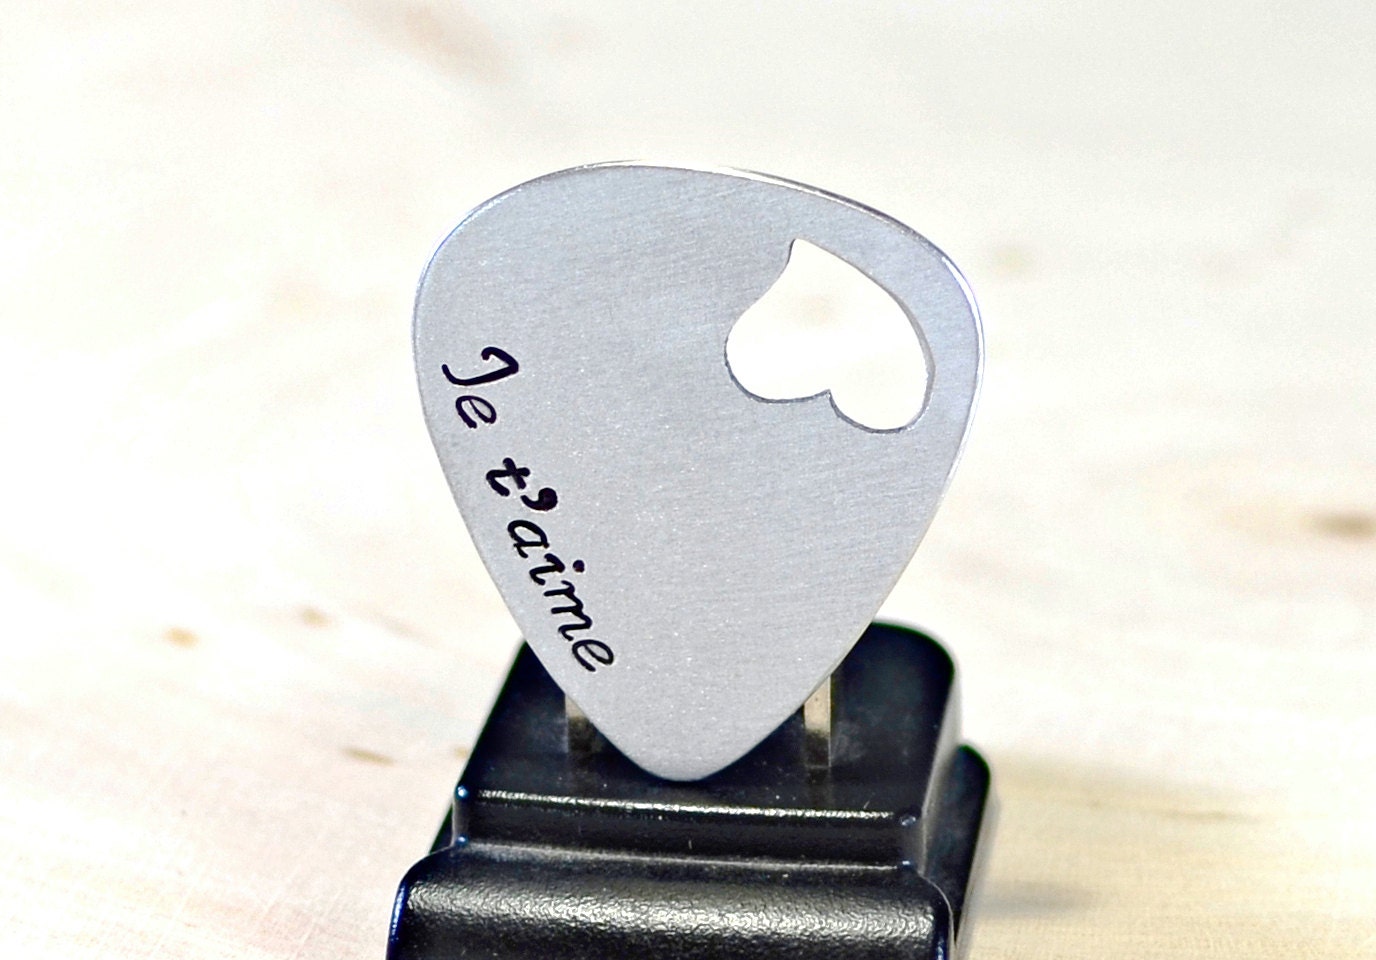 Je t'aime aluminum guitar pick with heart